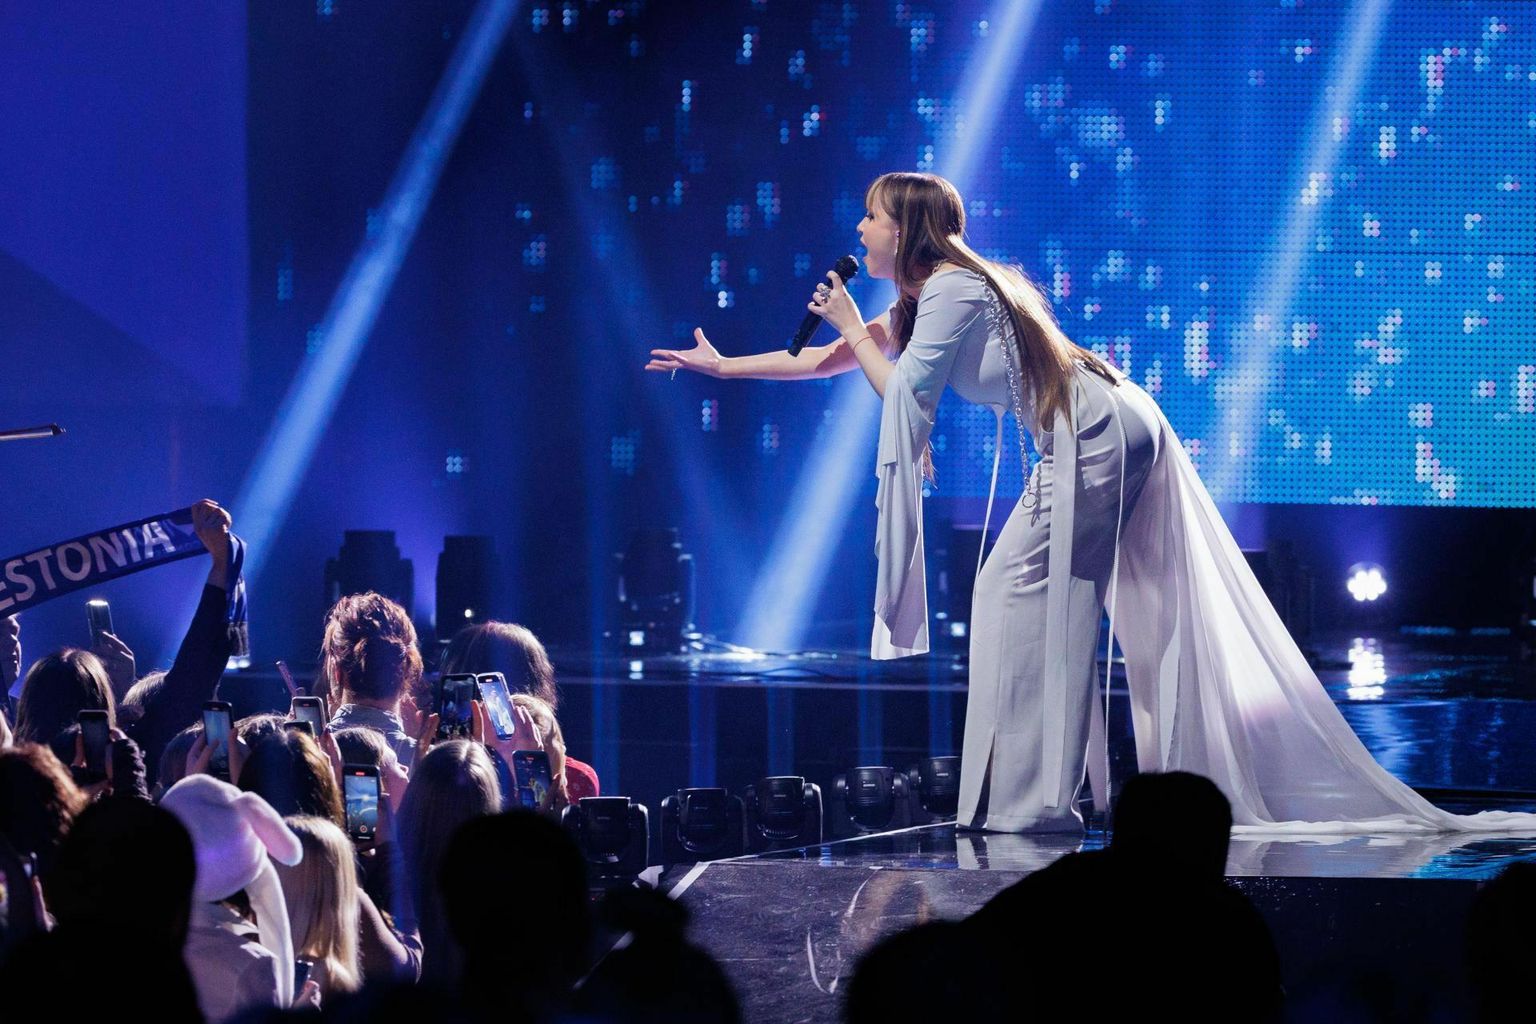 Estonian singer Alika Milova finished eighth with 168 points in the Eurovision Song Contest final.